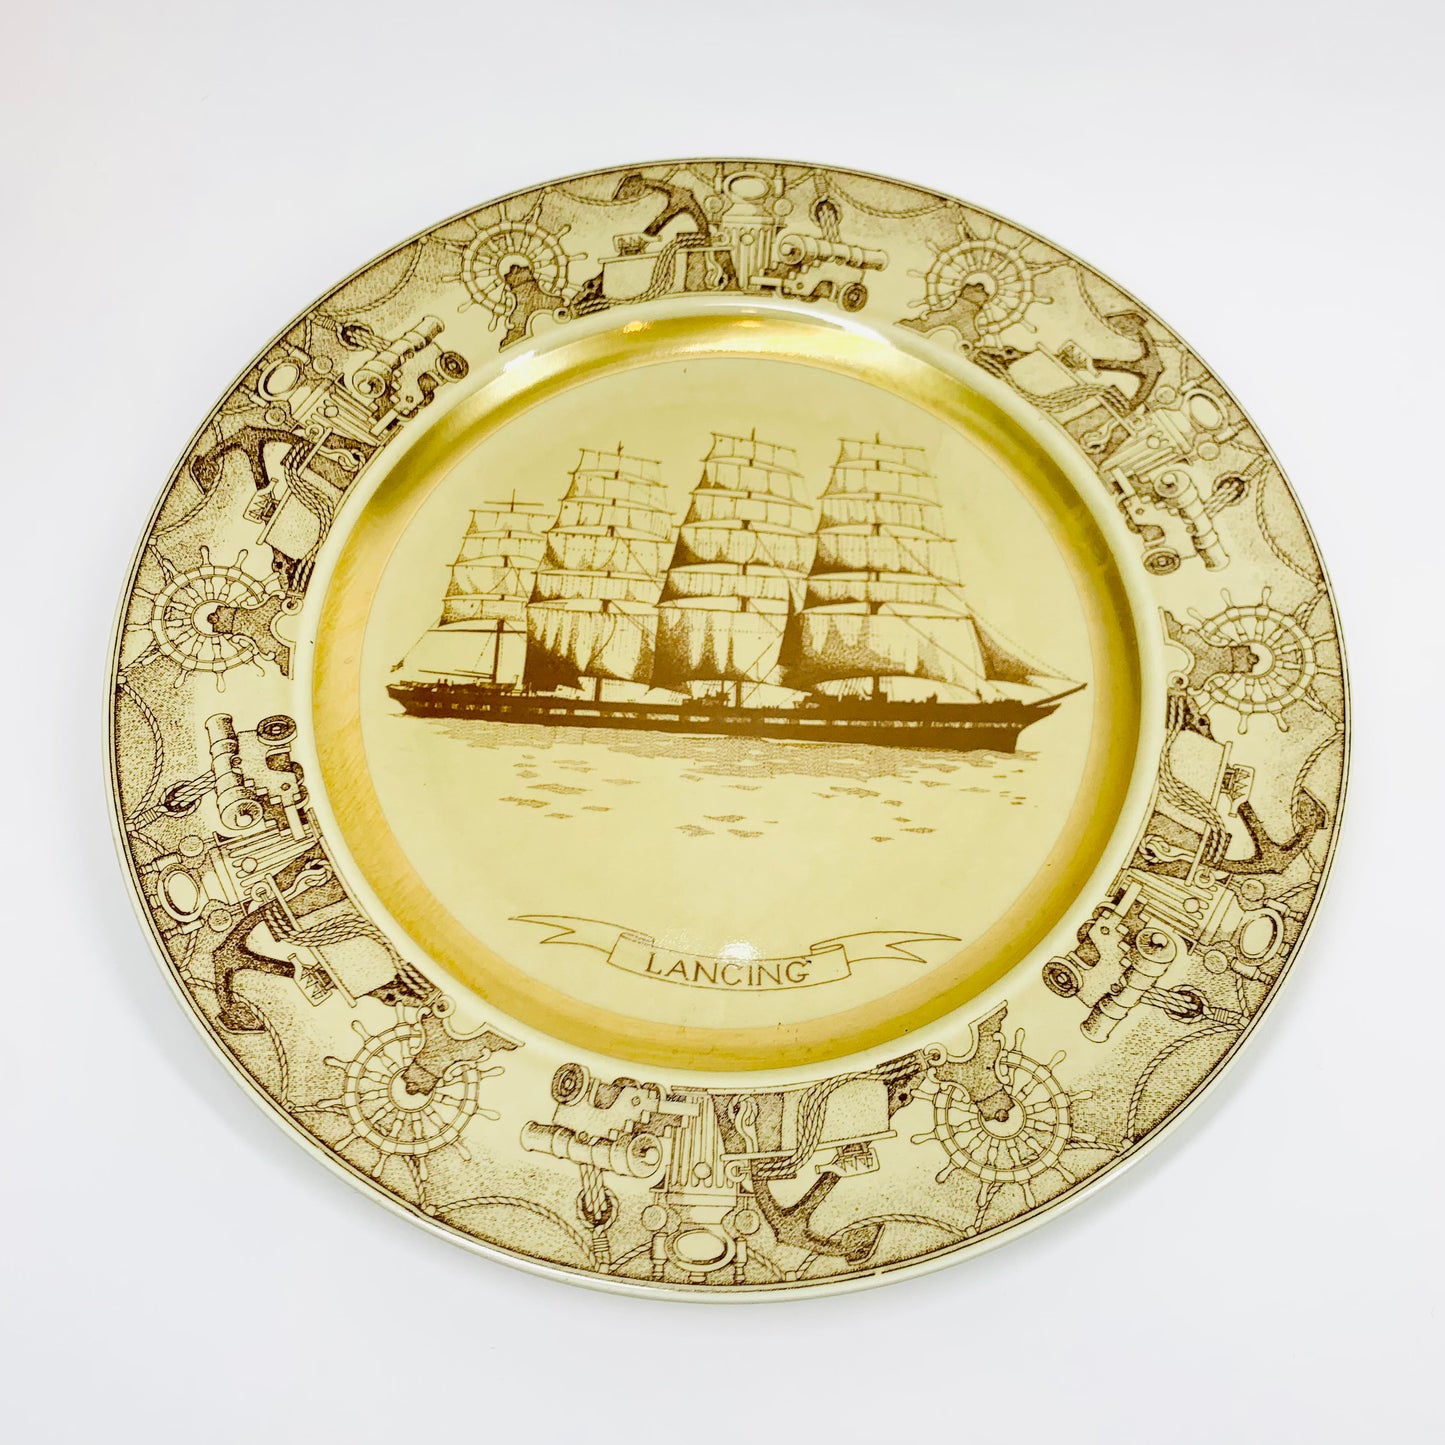 Extremely rare collector Norwegian plate of the Norske Skuter Knutsen Shipping Line